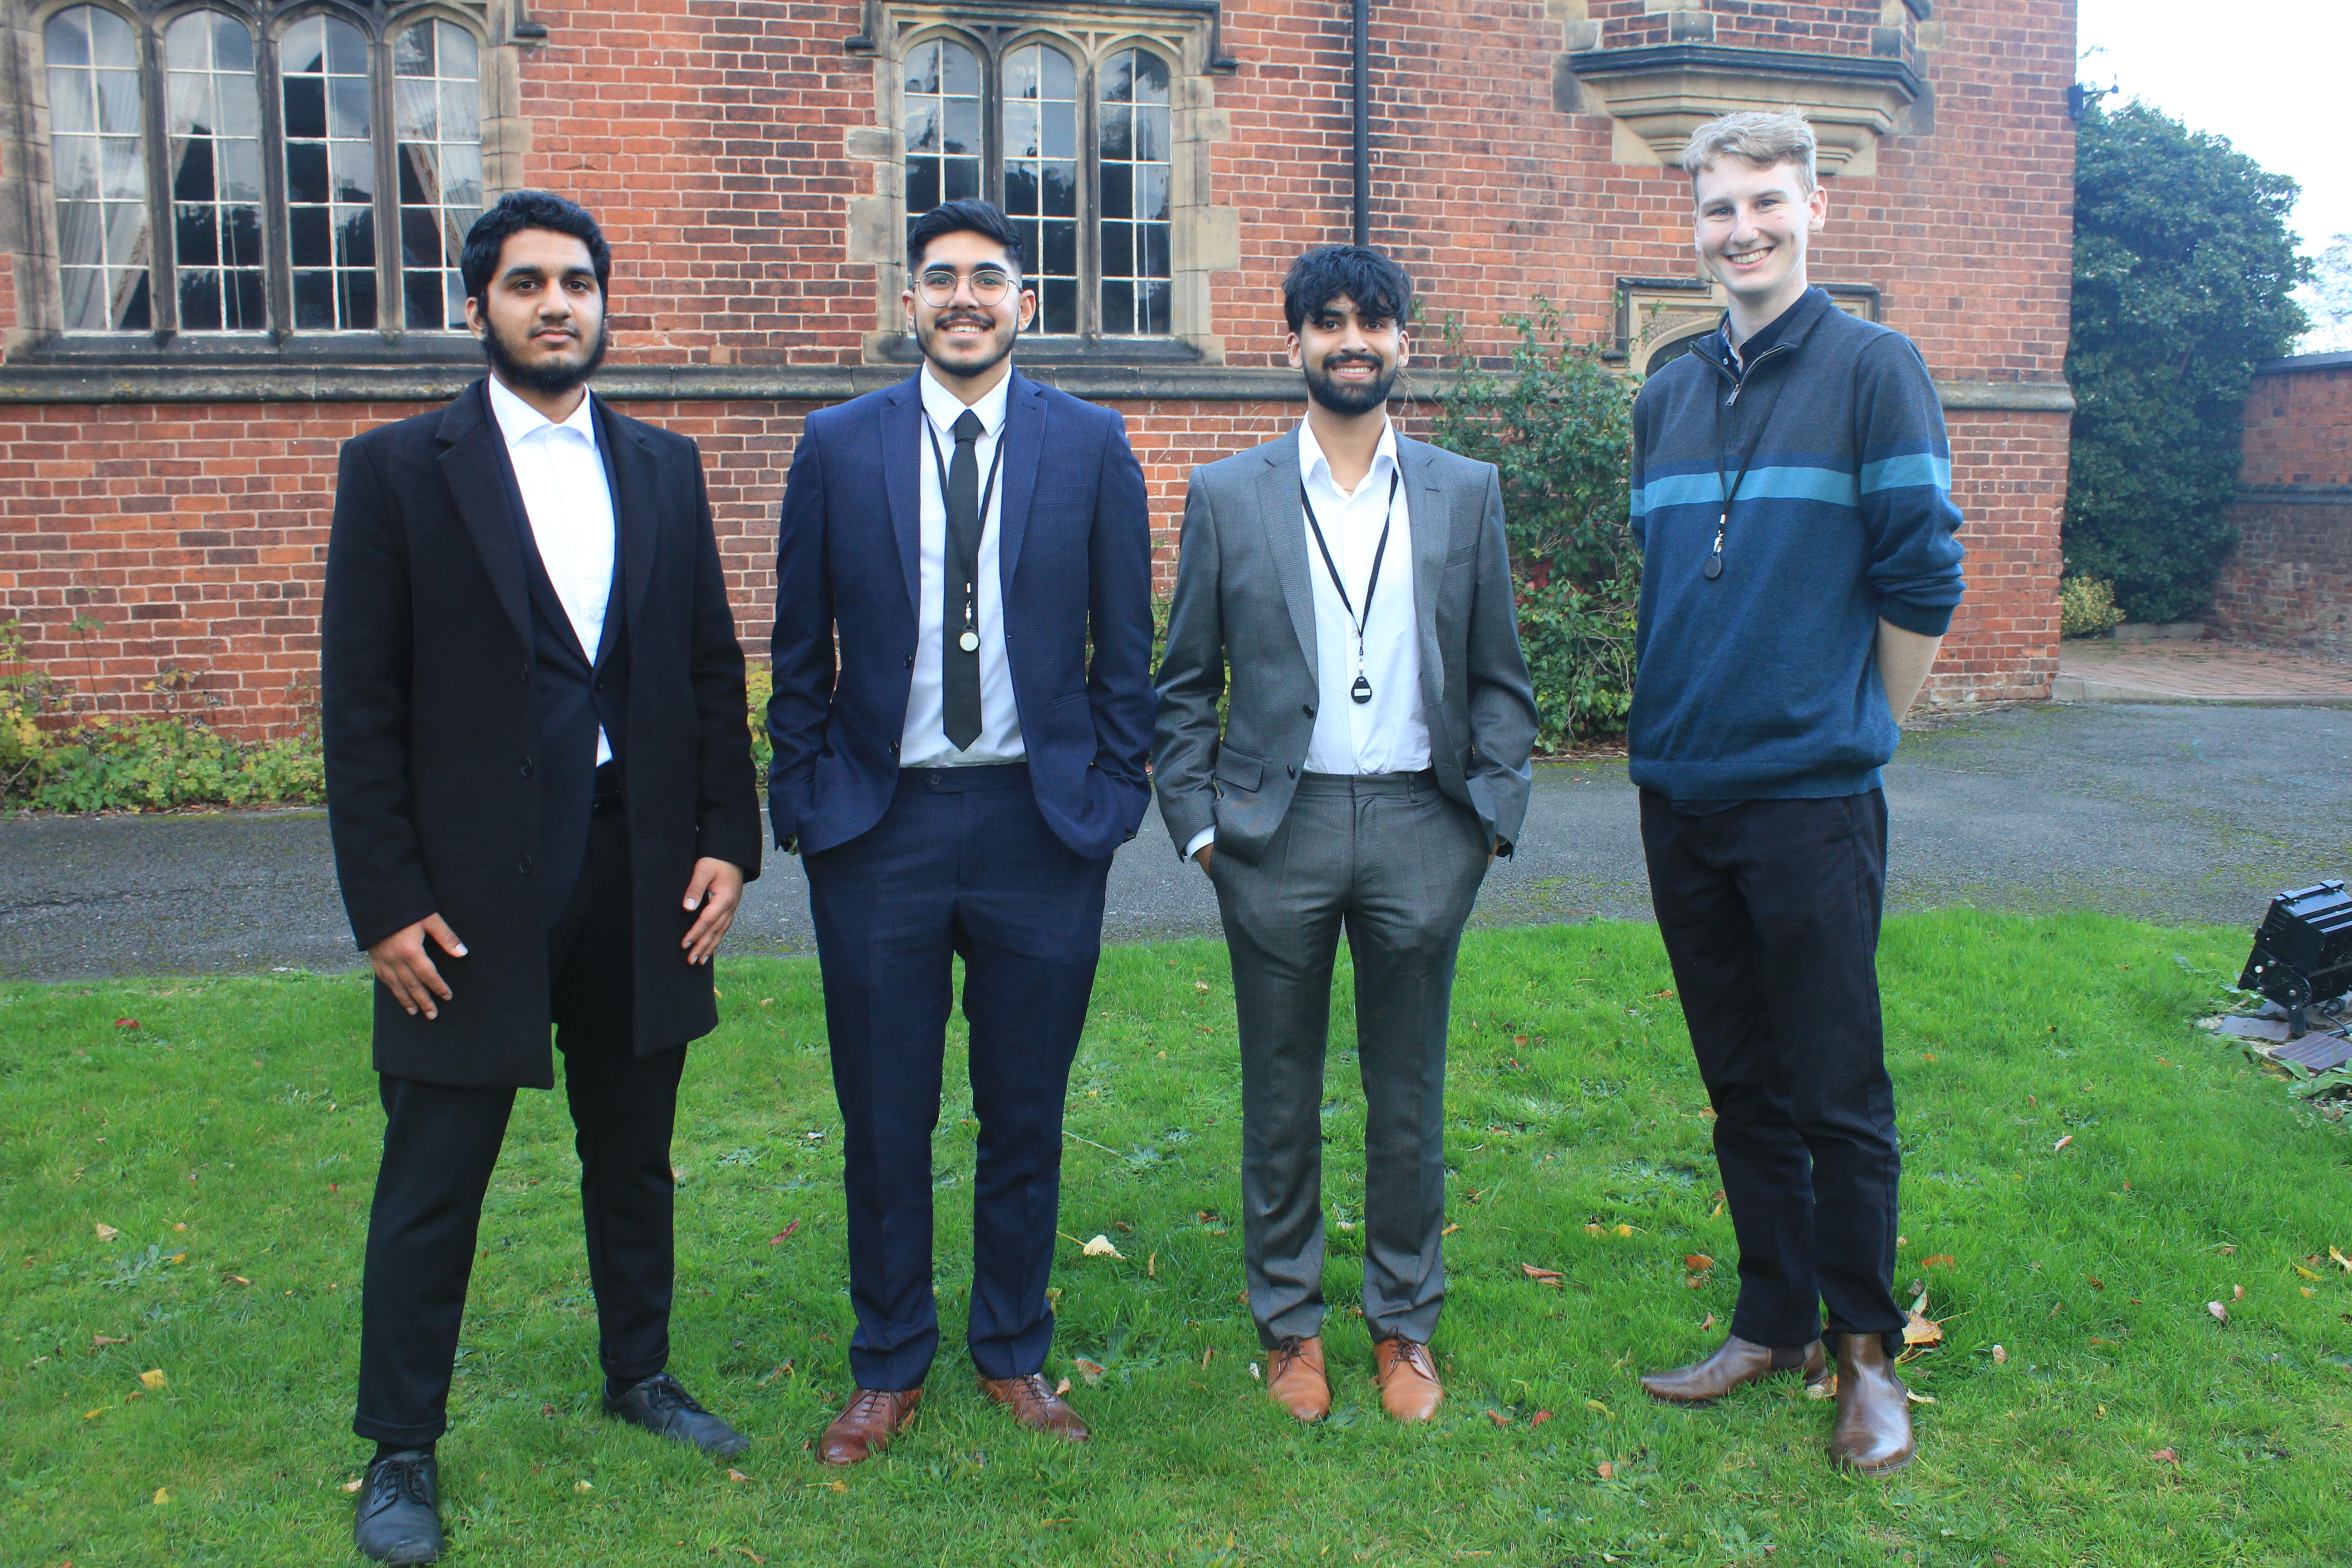 Lichfield District Council's new Business Analyst apprentices